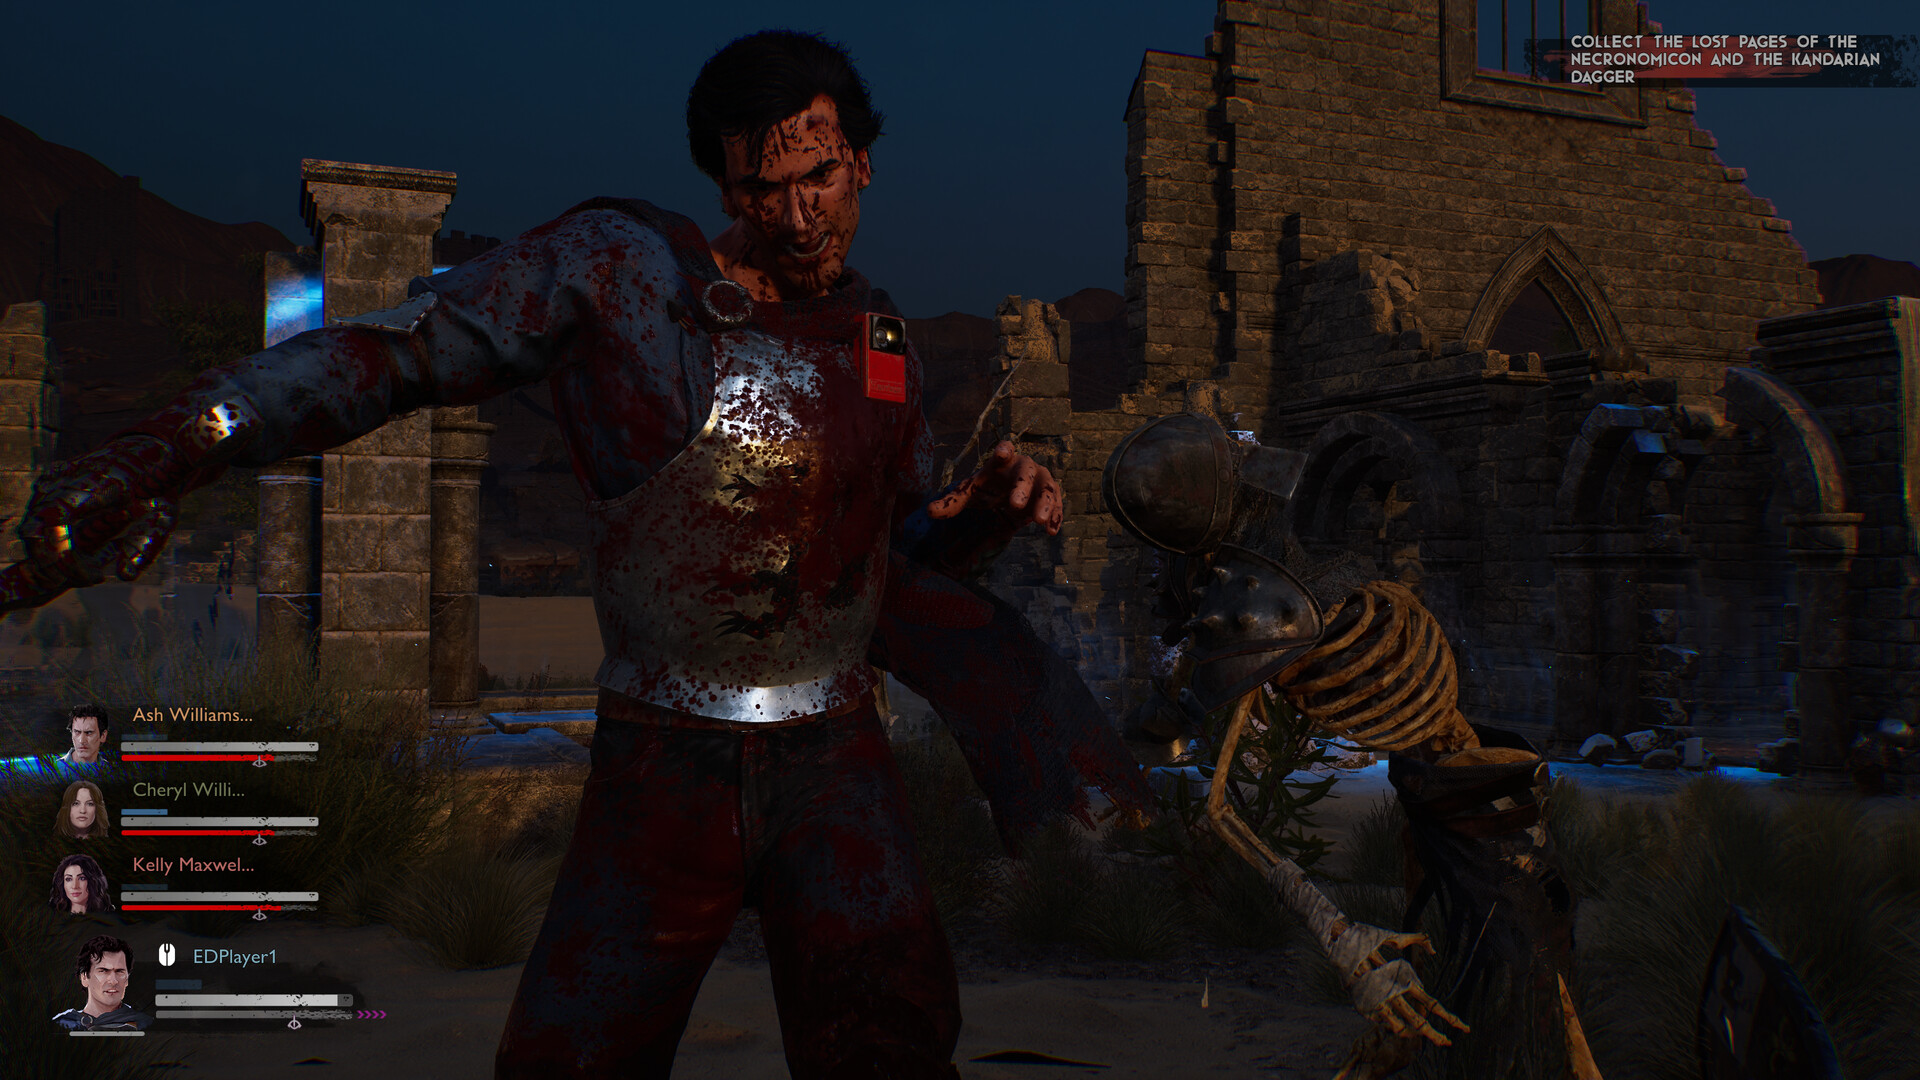 Evil Dead: The Game - Army of Darkness Bundle